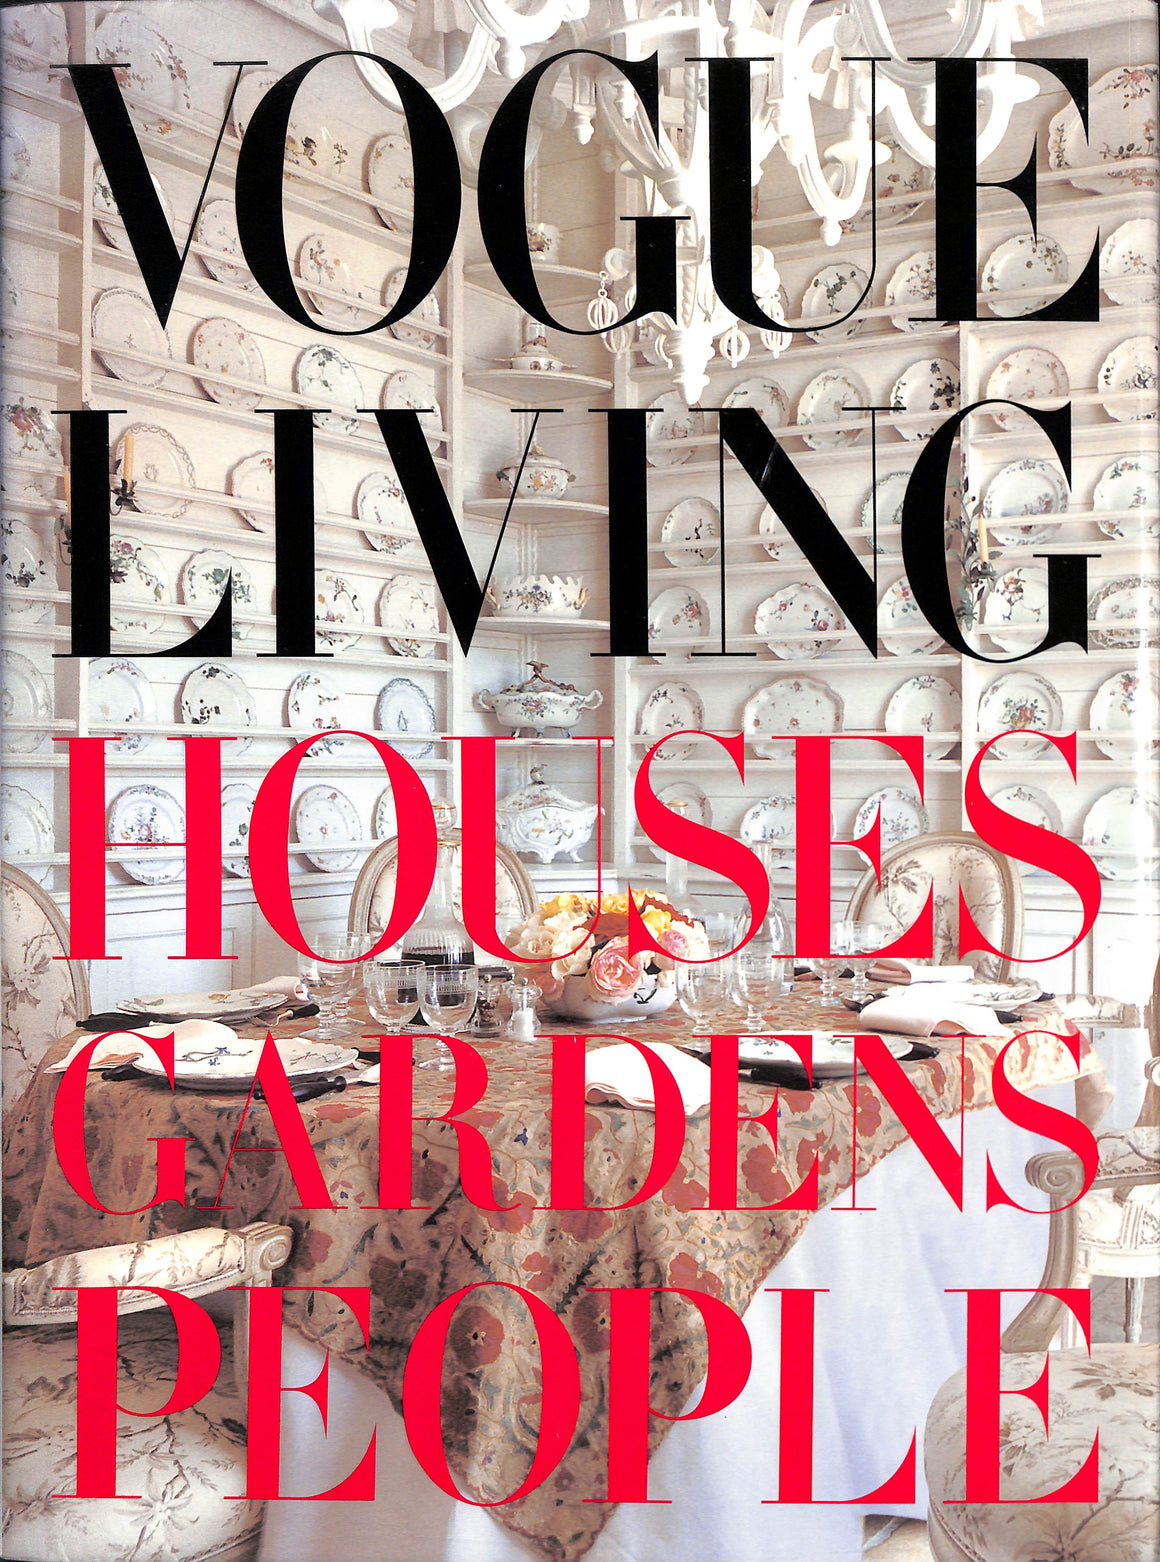 Vogue Living Houses, Gardens, People (Inscribed!)